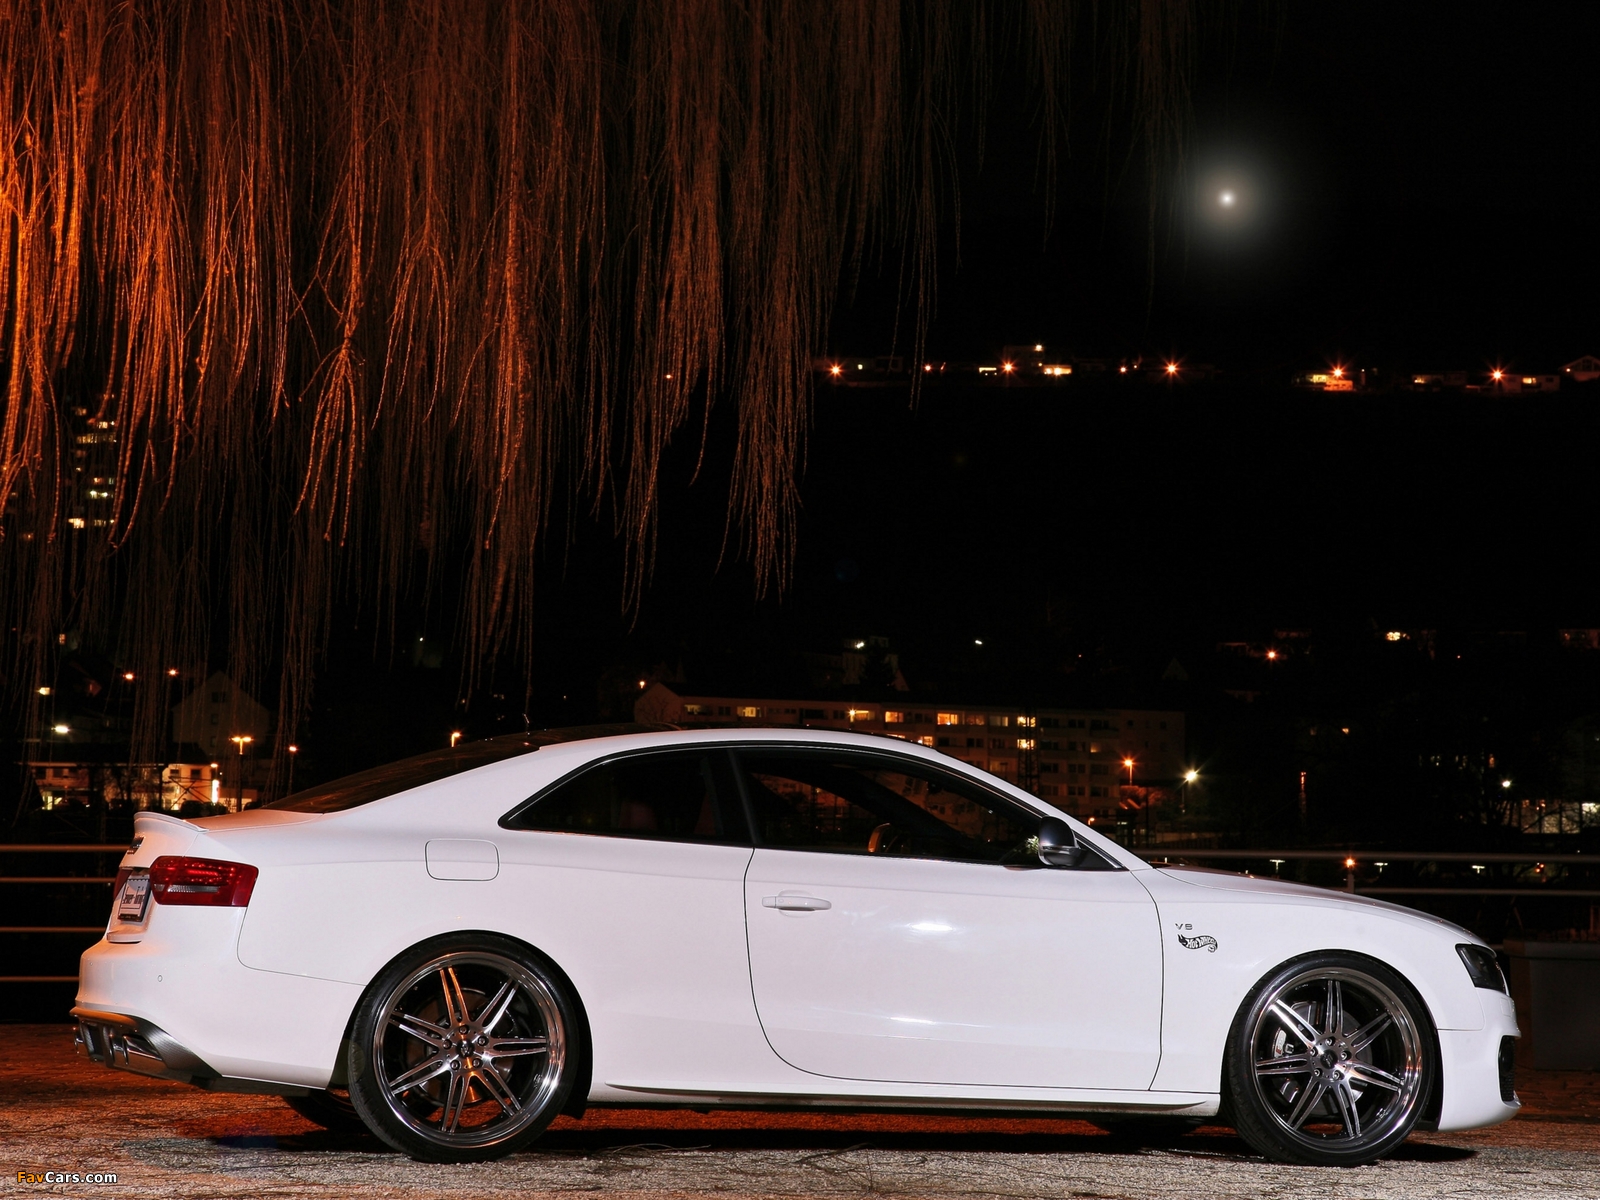 Senner Tuning Audi S5 Coupe 2010–12 images (1600 x 1200)